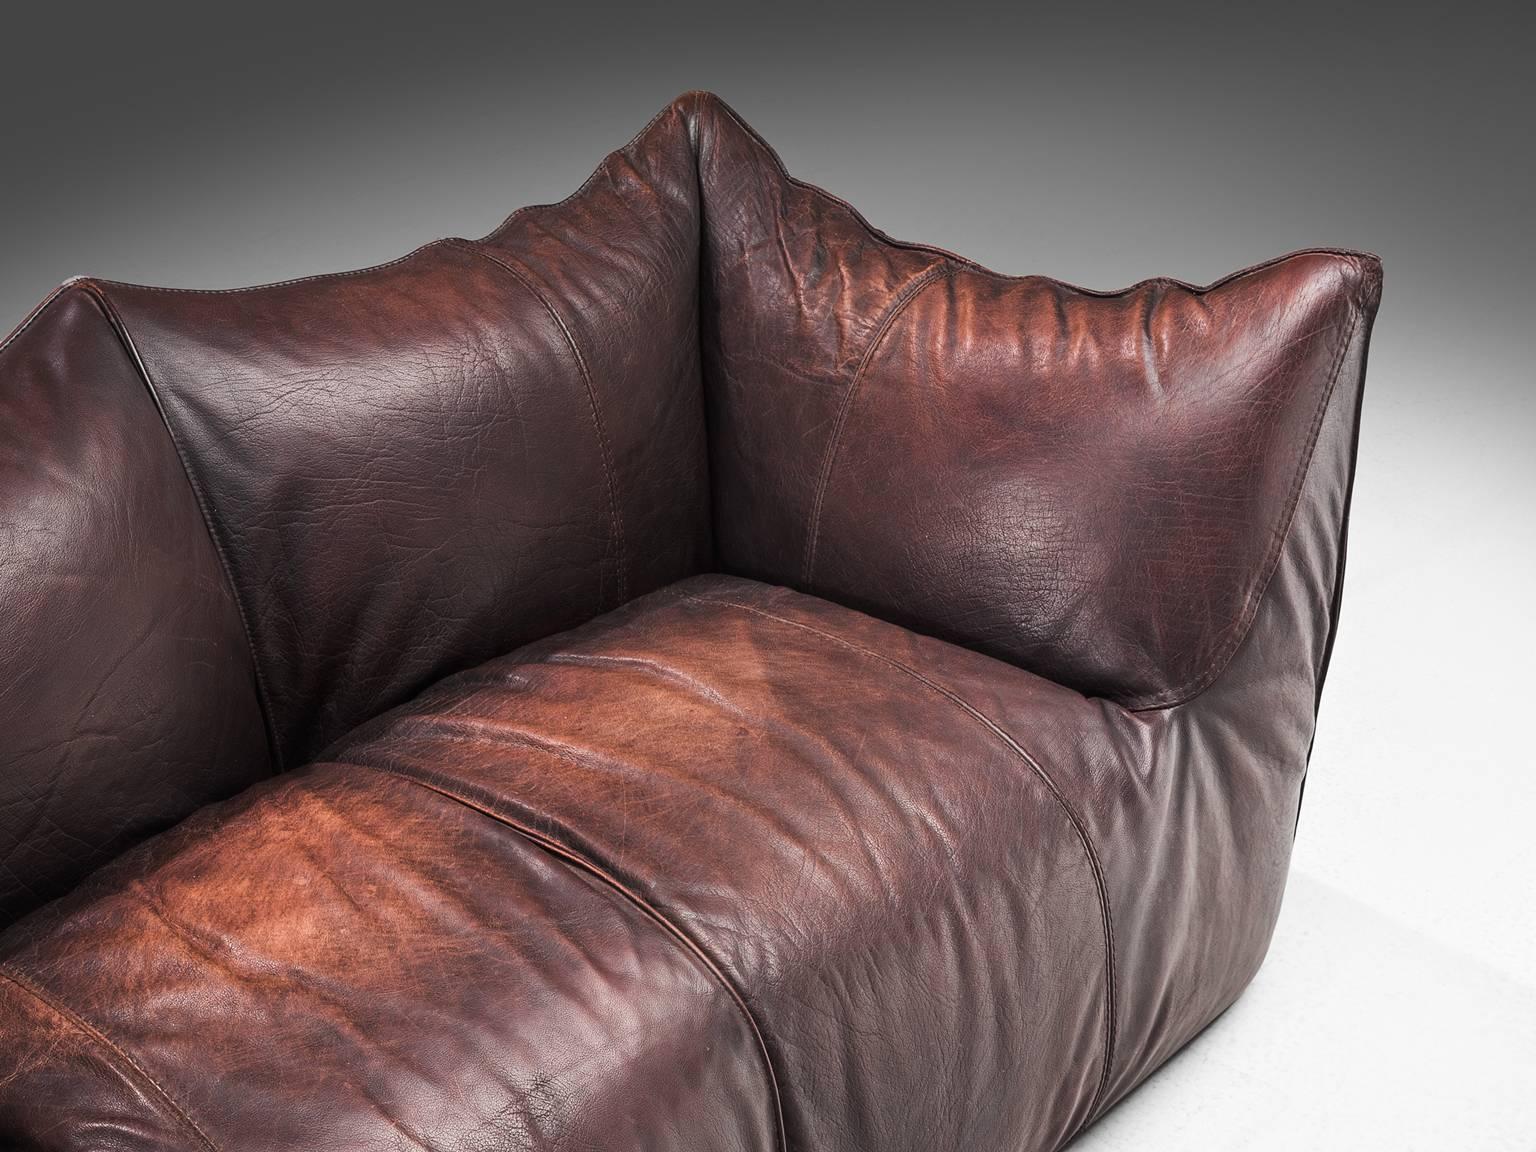 Mario Bellini for B&B Italia, 'Le Bambole' sofa, brown leather, Italy, 1972.

This comfortable dark brown settee is bulky and playful, shaped as if it is merely a large cushion and the accompanying feeling is the same. It is designed by Mario